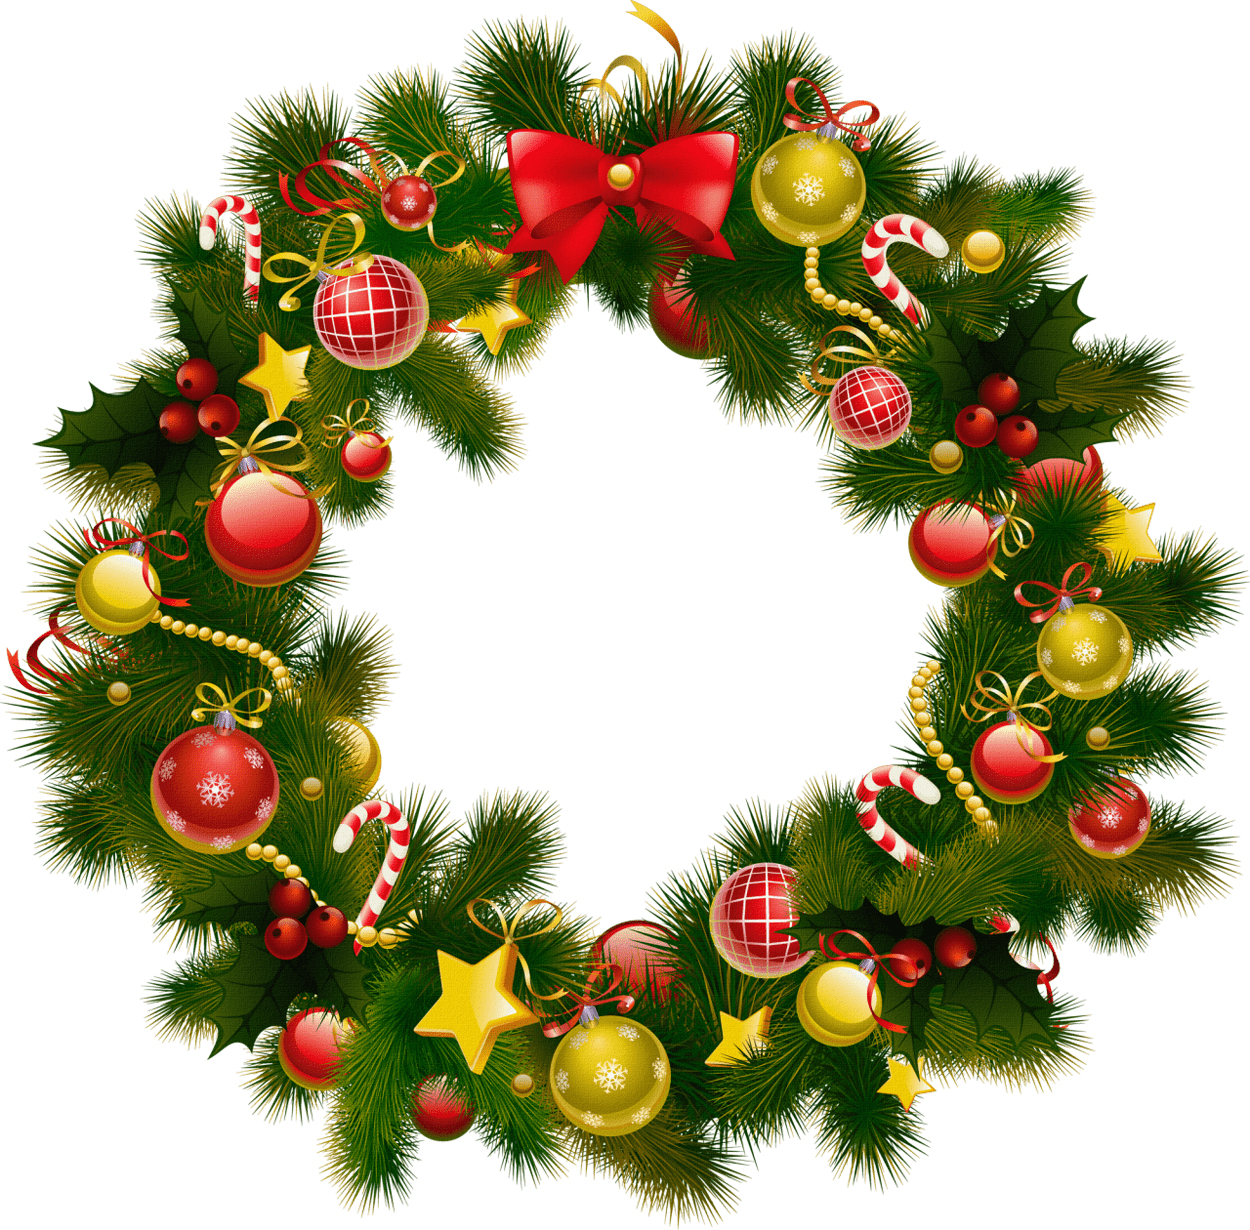 Christmas Wreath PNG Background Isolated Image